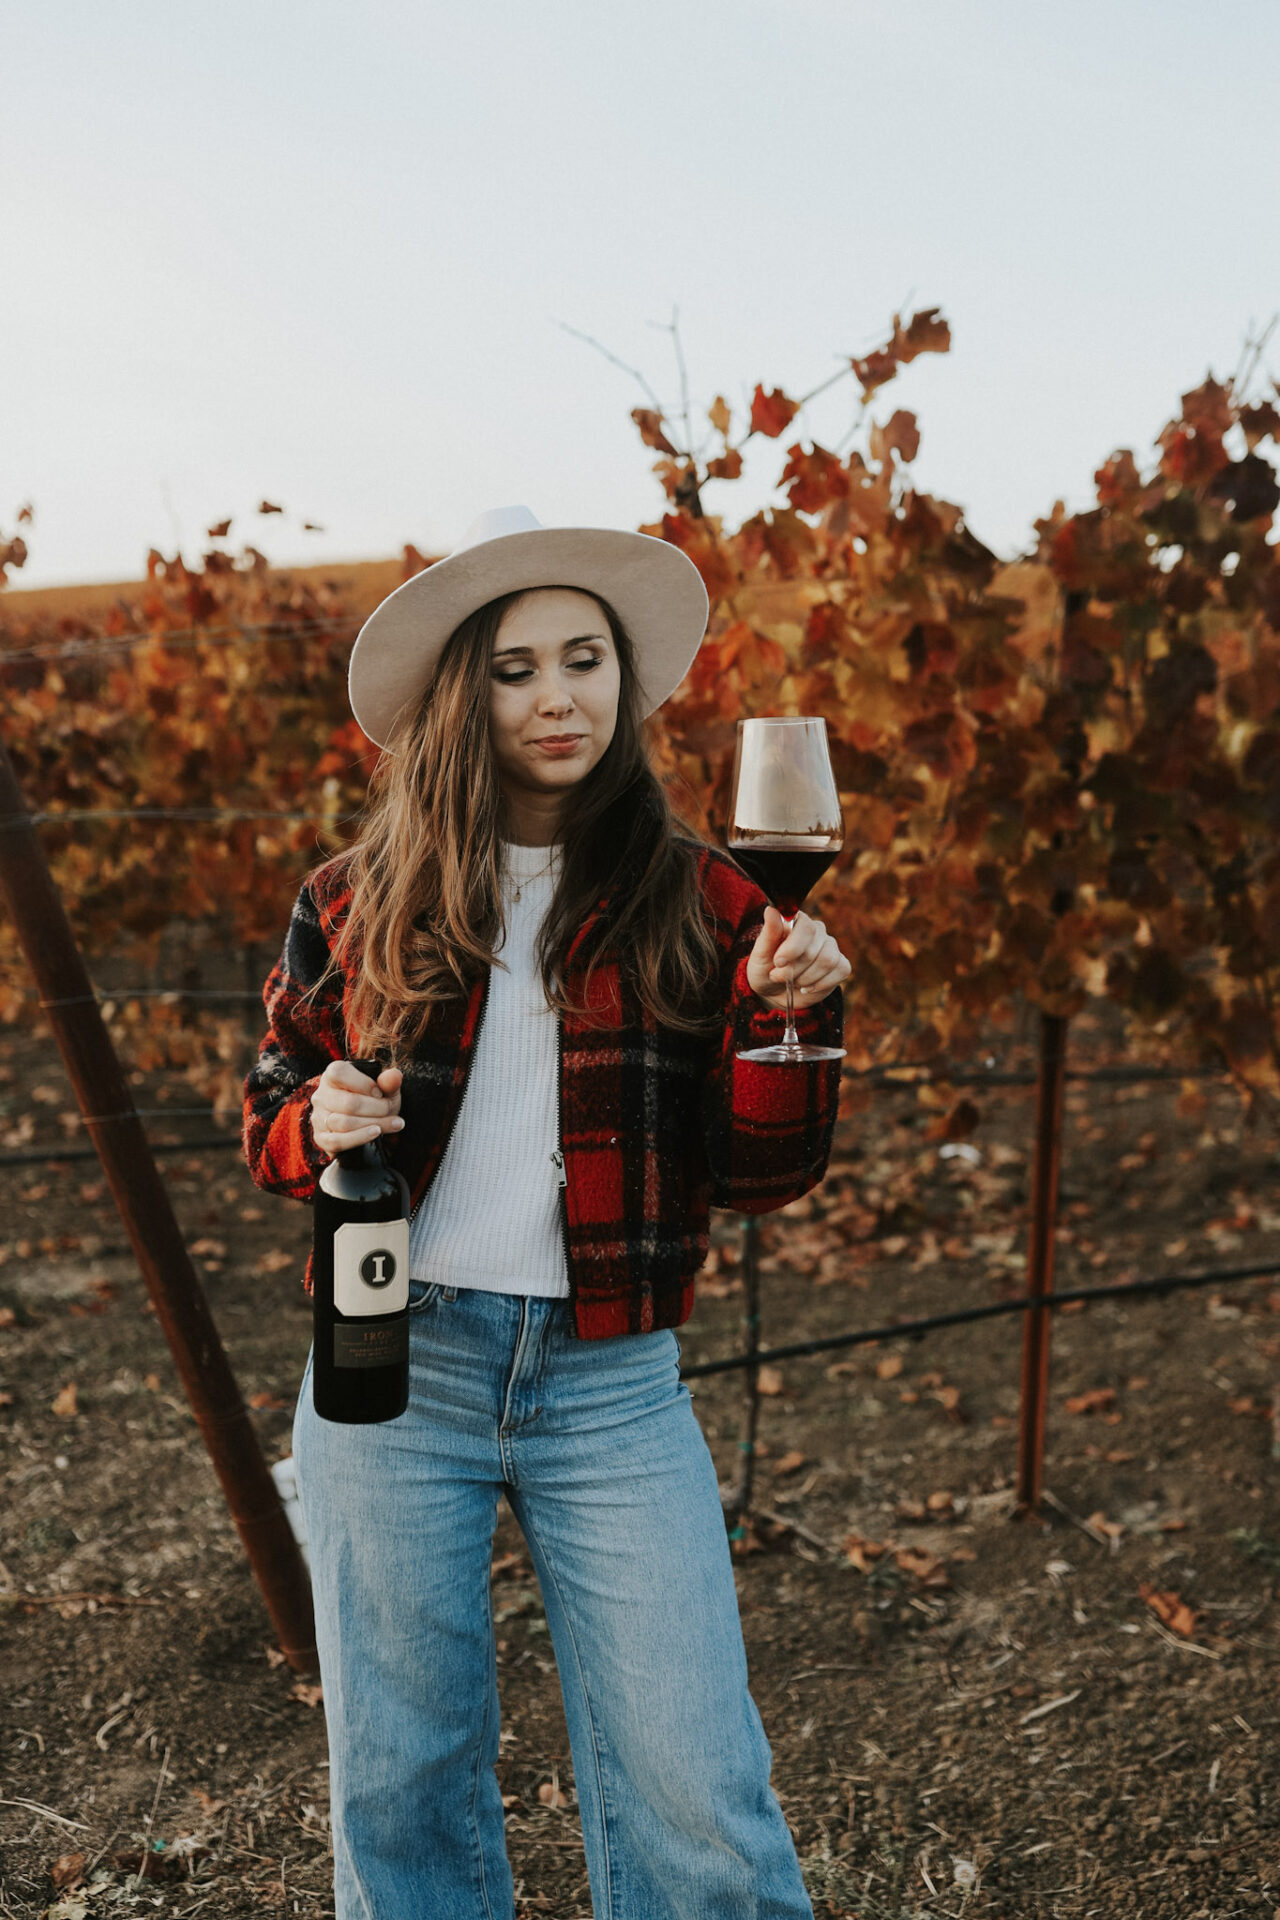 Healthiest Wine - Paige in a vineyard drinking the best red wine for health